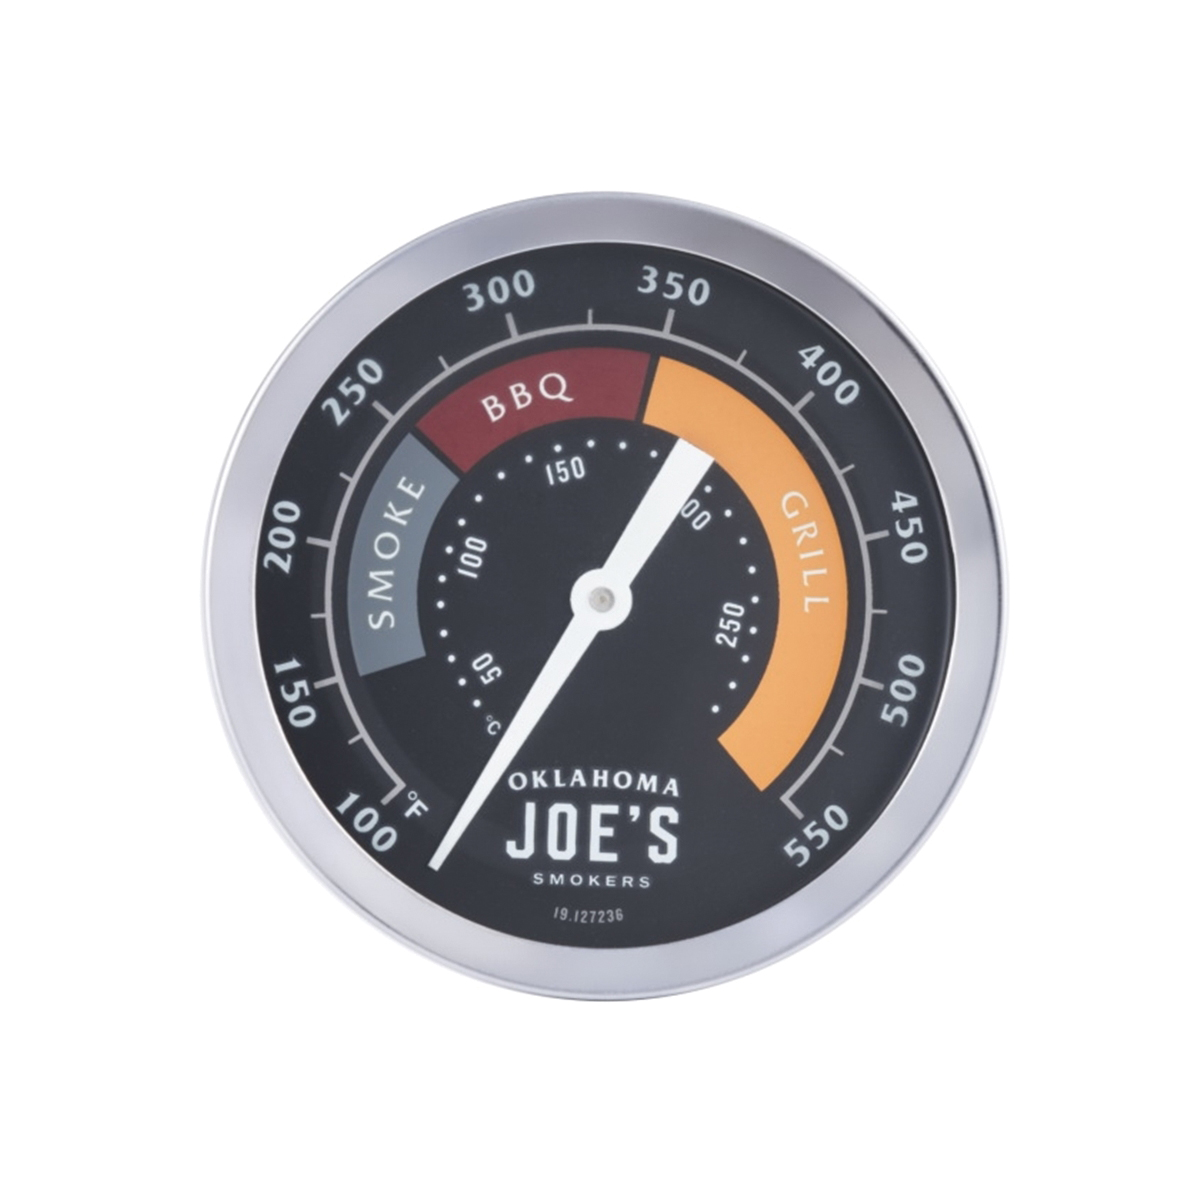 Oklahoma Joe's 3695528R06 Smoker Gauge, For: BBQ Smokers with a 13/16 in Opening